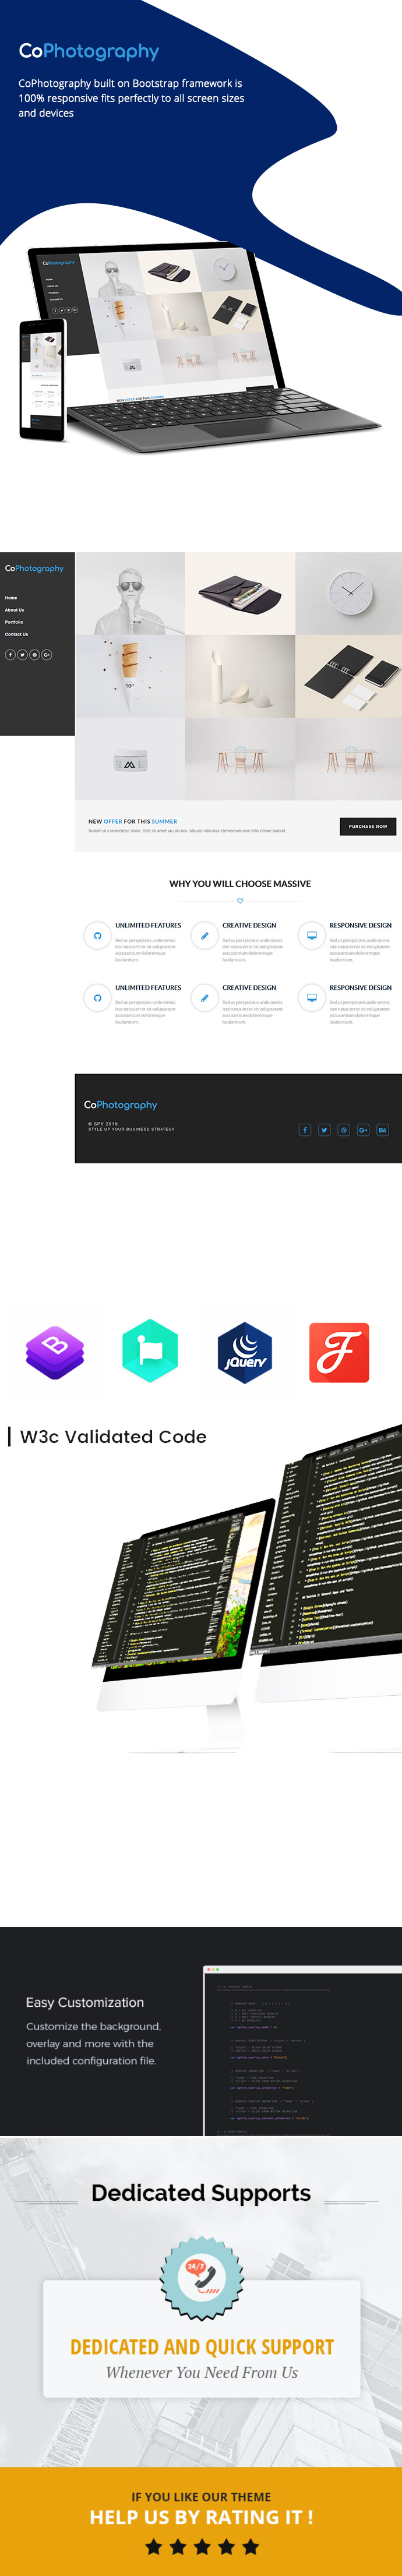 CoPhotography – Startup Agency HTML Template theme